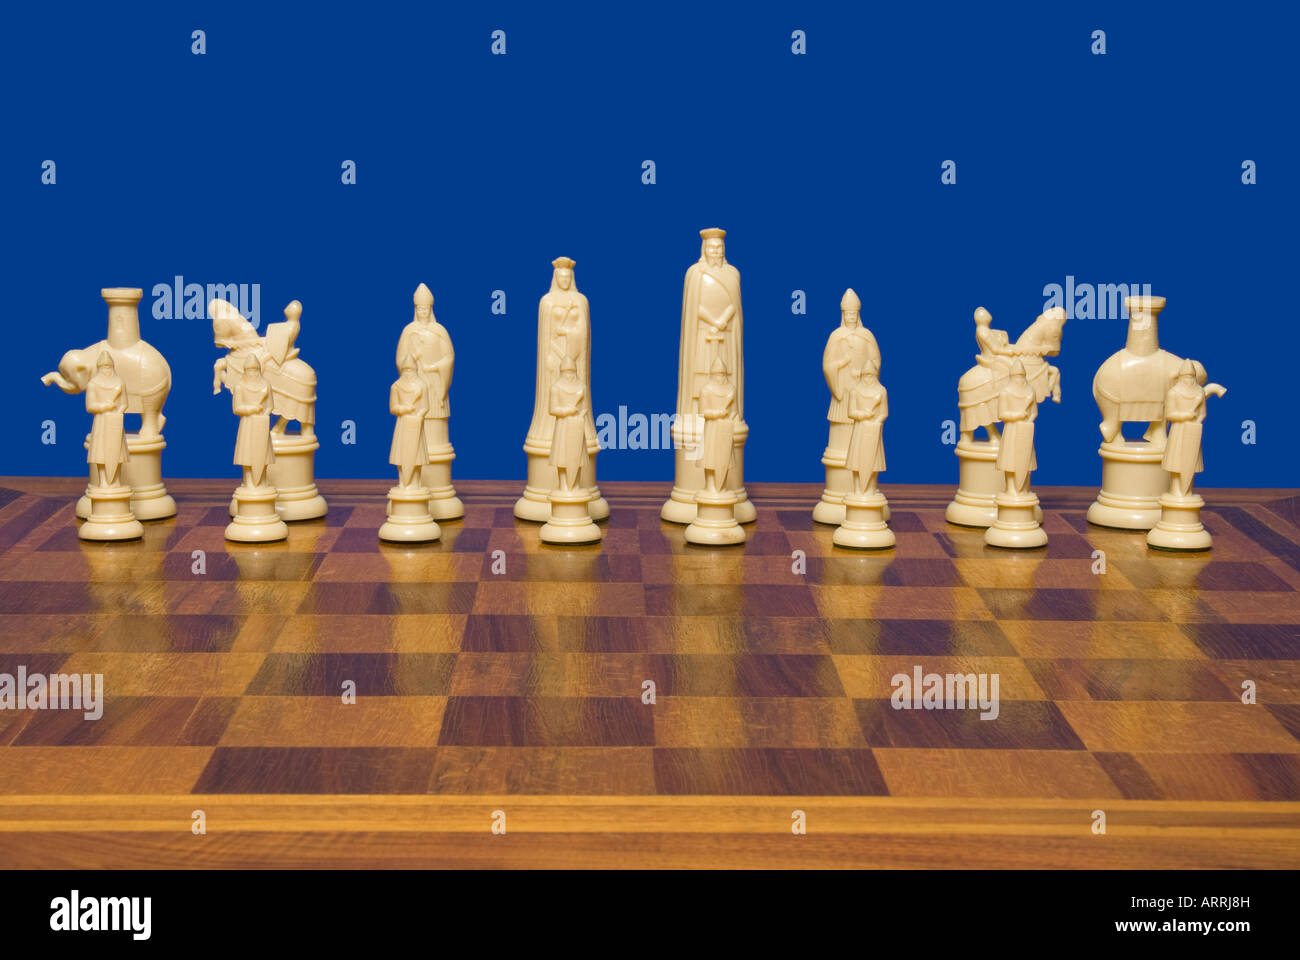 Chess set against a blue background shows the ivory colored team ready for competition Stock Photo